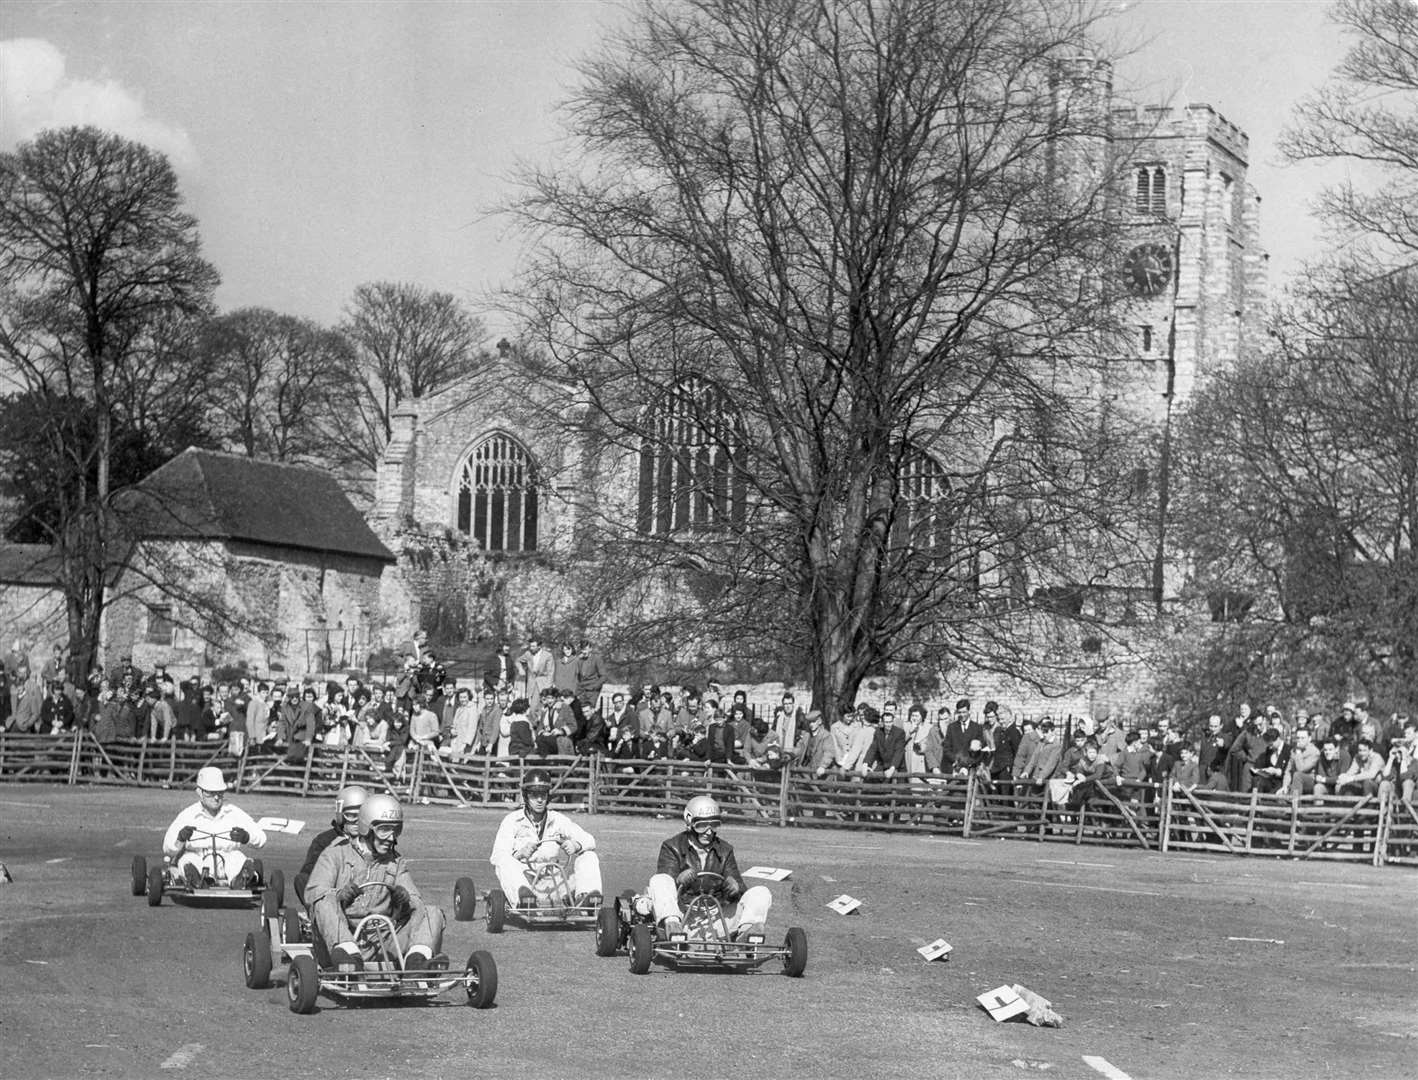 Go-kart racing came to Maidstone for the first time in April 1960, but proved a short-lived attraction